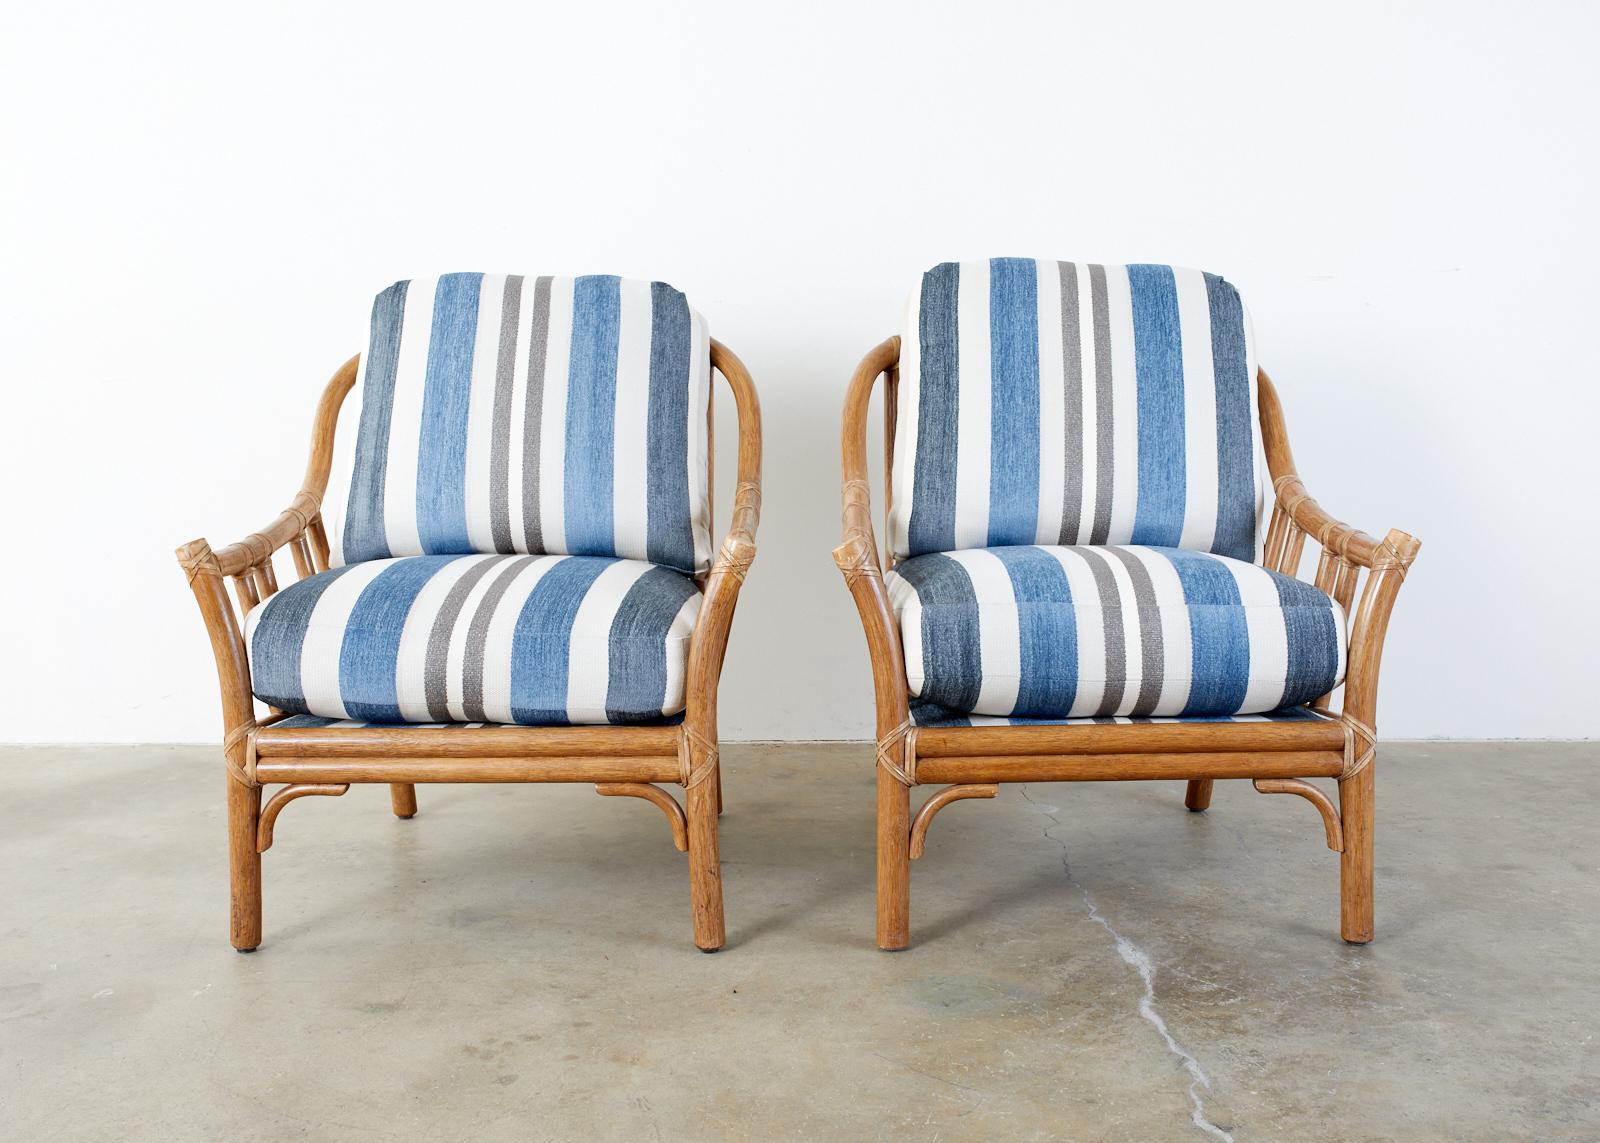 Gorgeous pair of McGuire oversized bamboo rattan lounge chairs made in the California organic modern style. The chairs feature a large bent rattan frame fitted with thick linen and chenille striped cushions. The frames are lashed together with